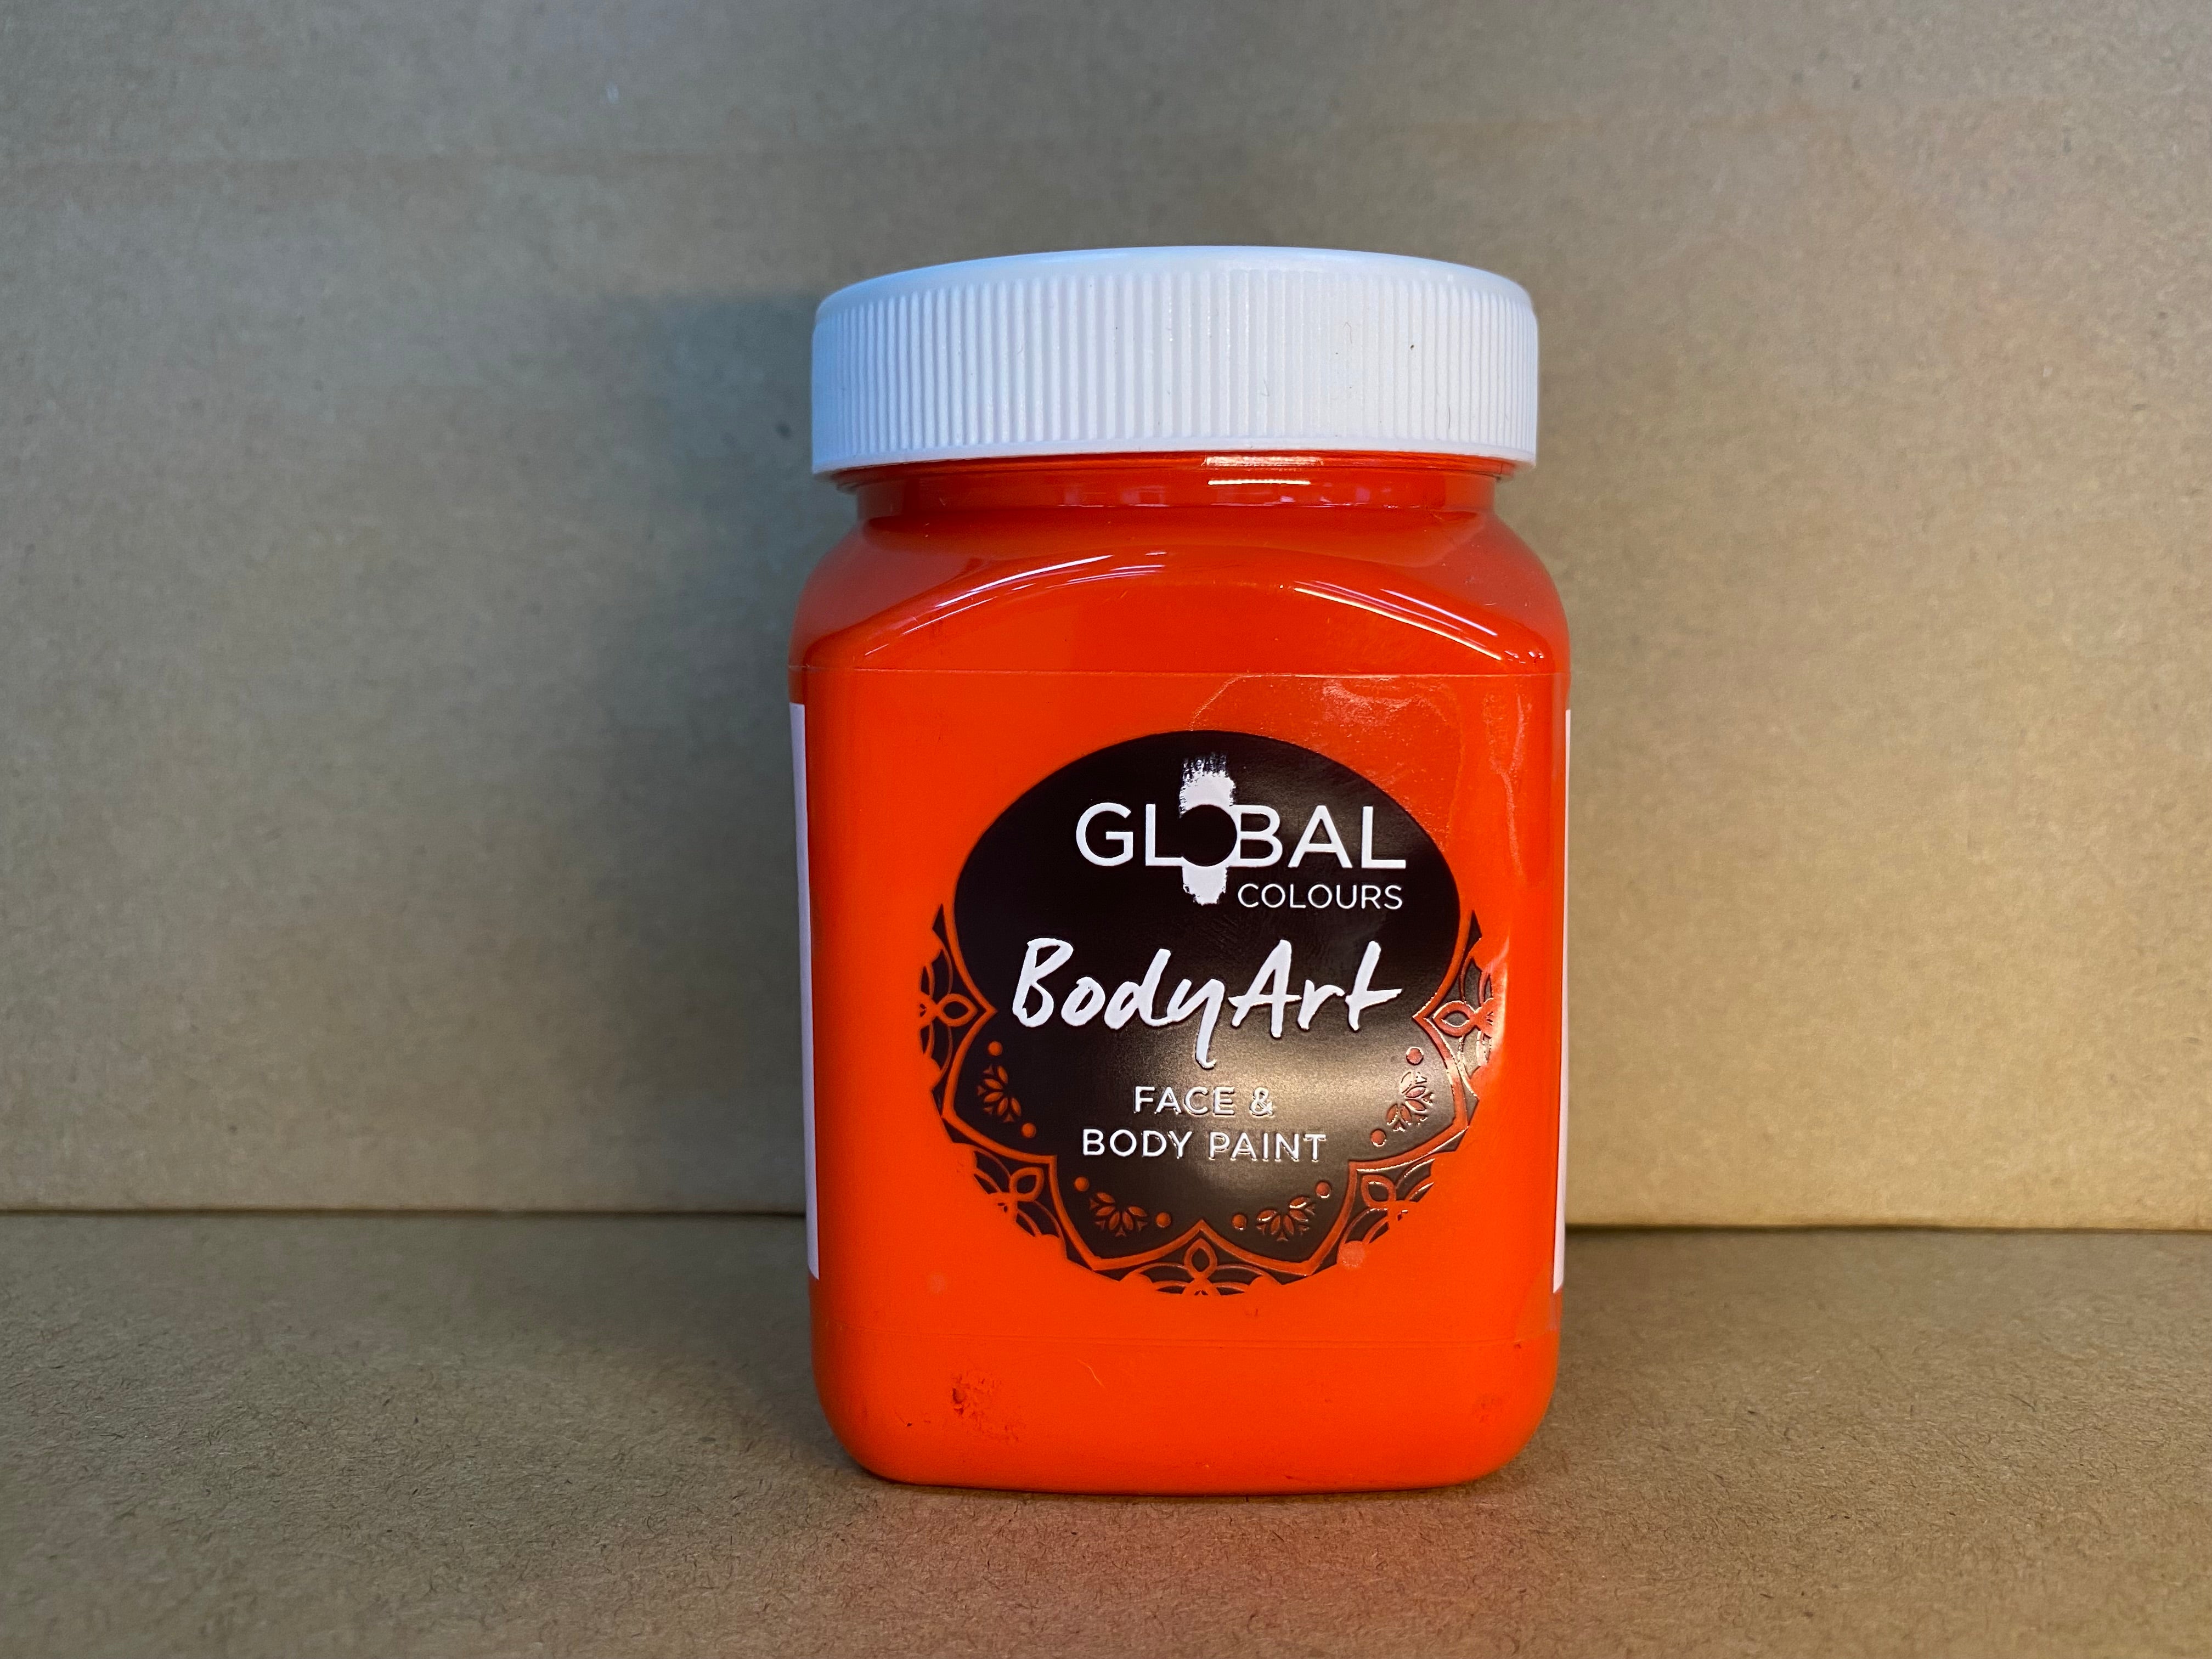 Global Colours 200ml Face and Body Paint